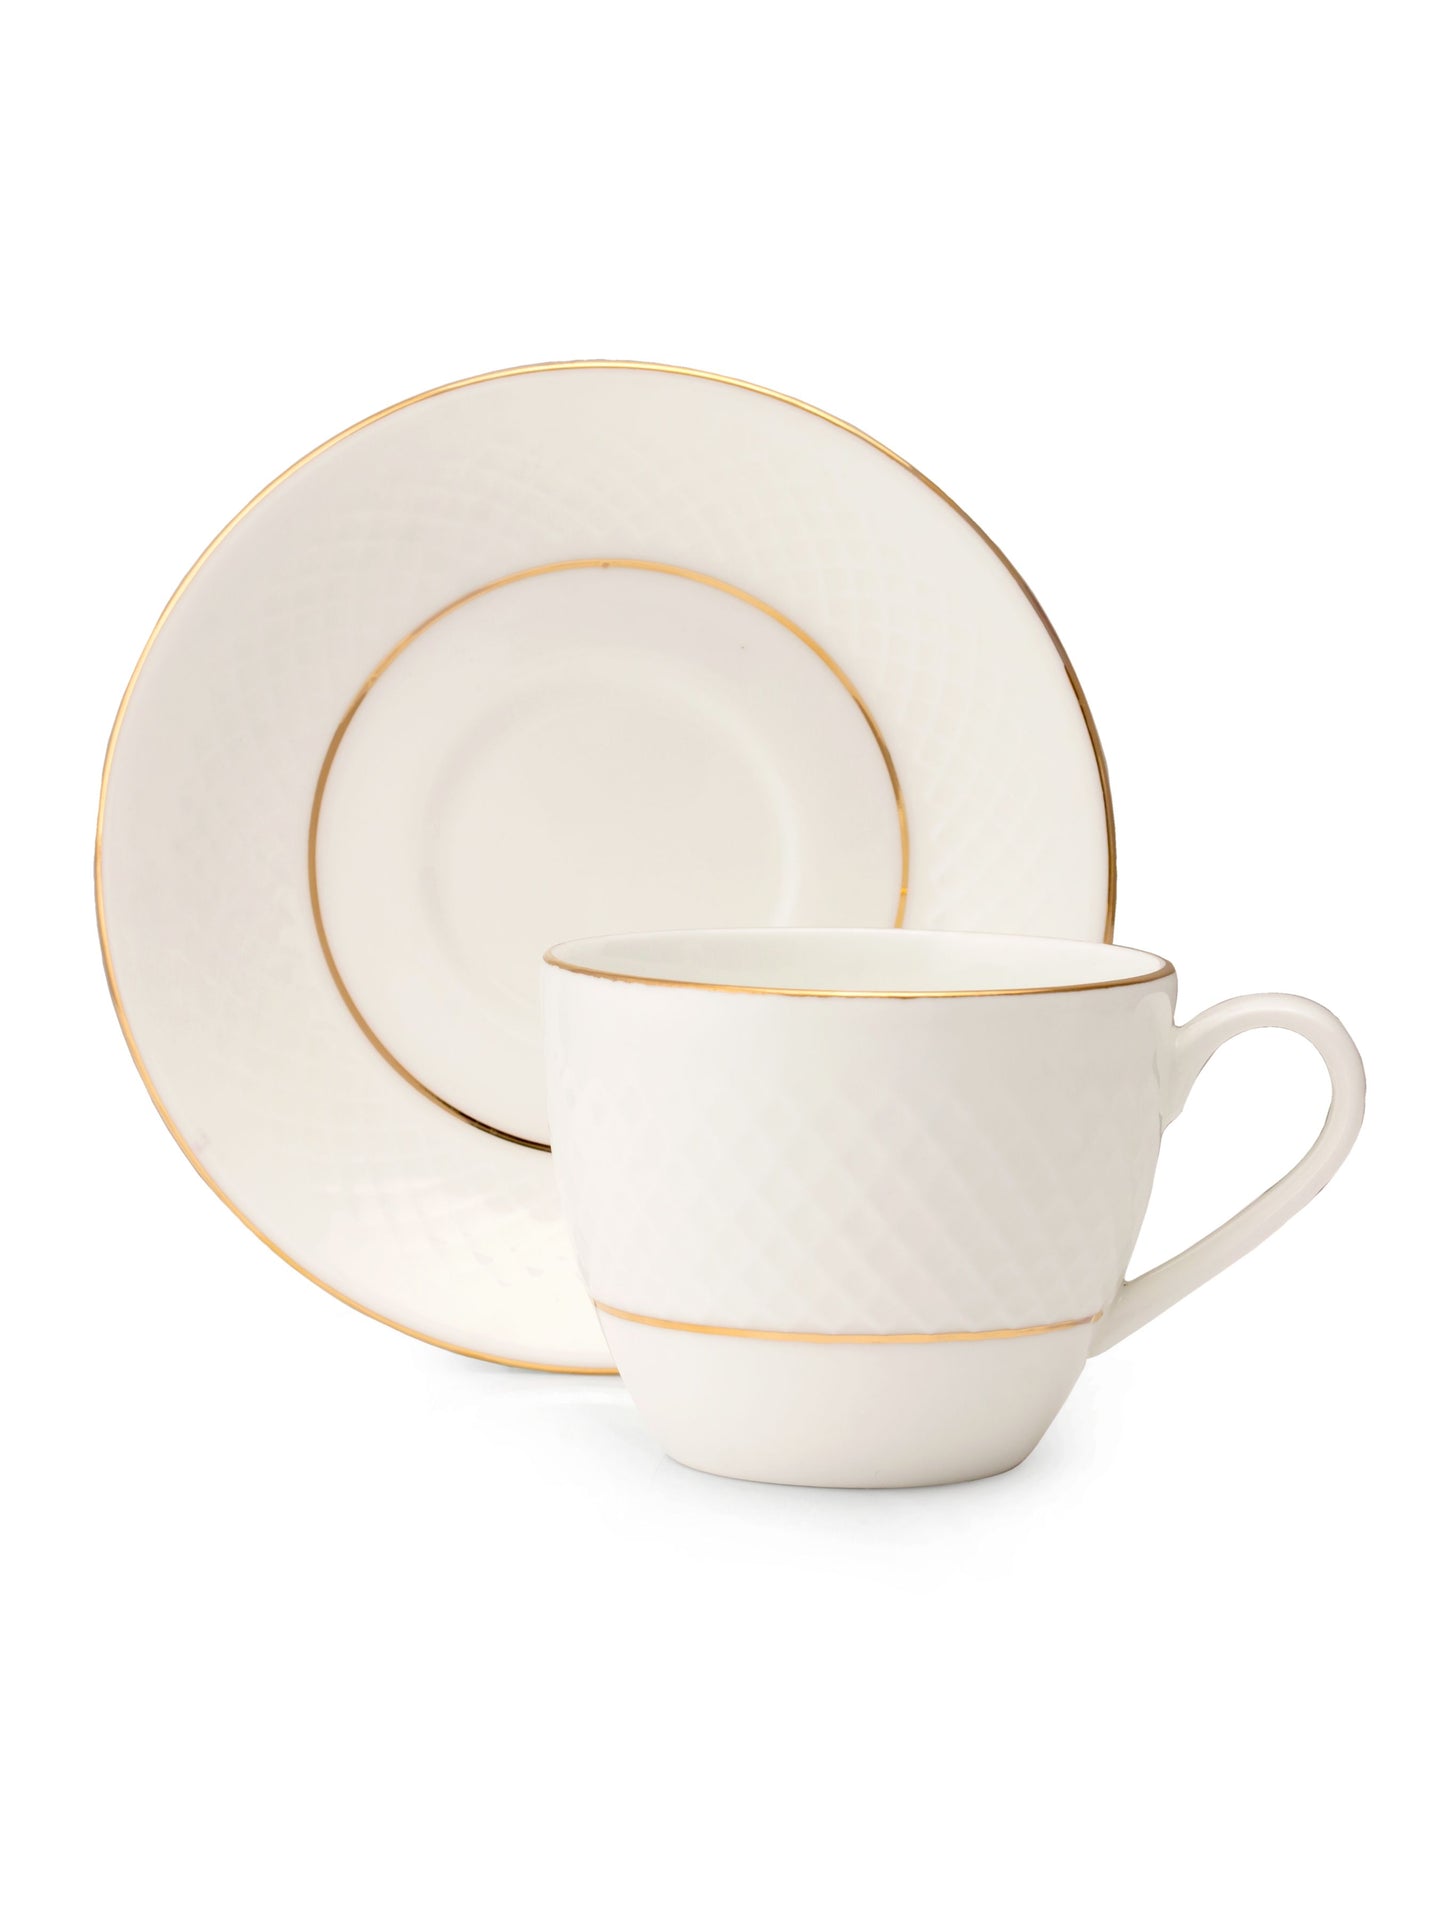 JCPL Pyro Gold Line Cup & Saucer, 160ml, Set of 12 (6 Cups + 6 Saucers) (110)